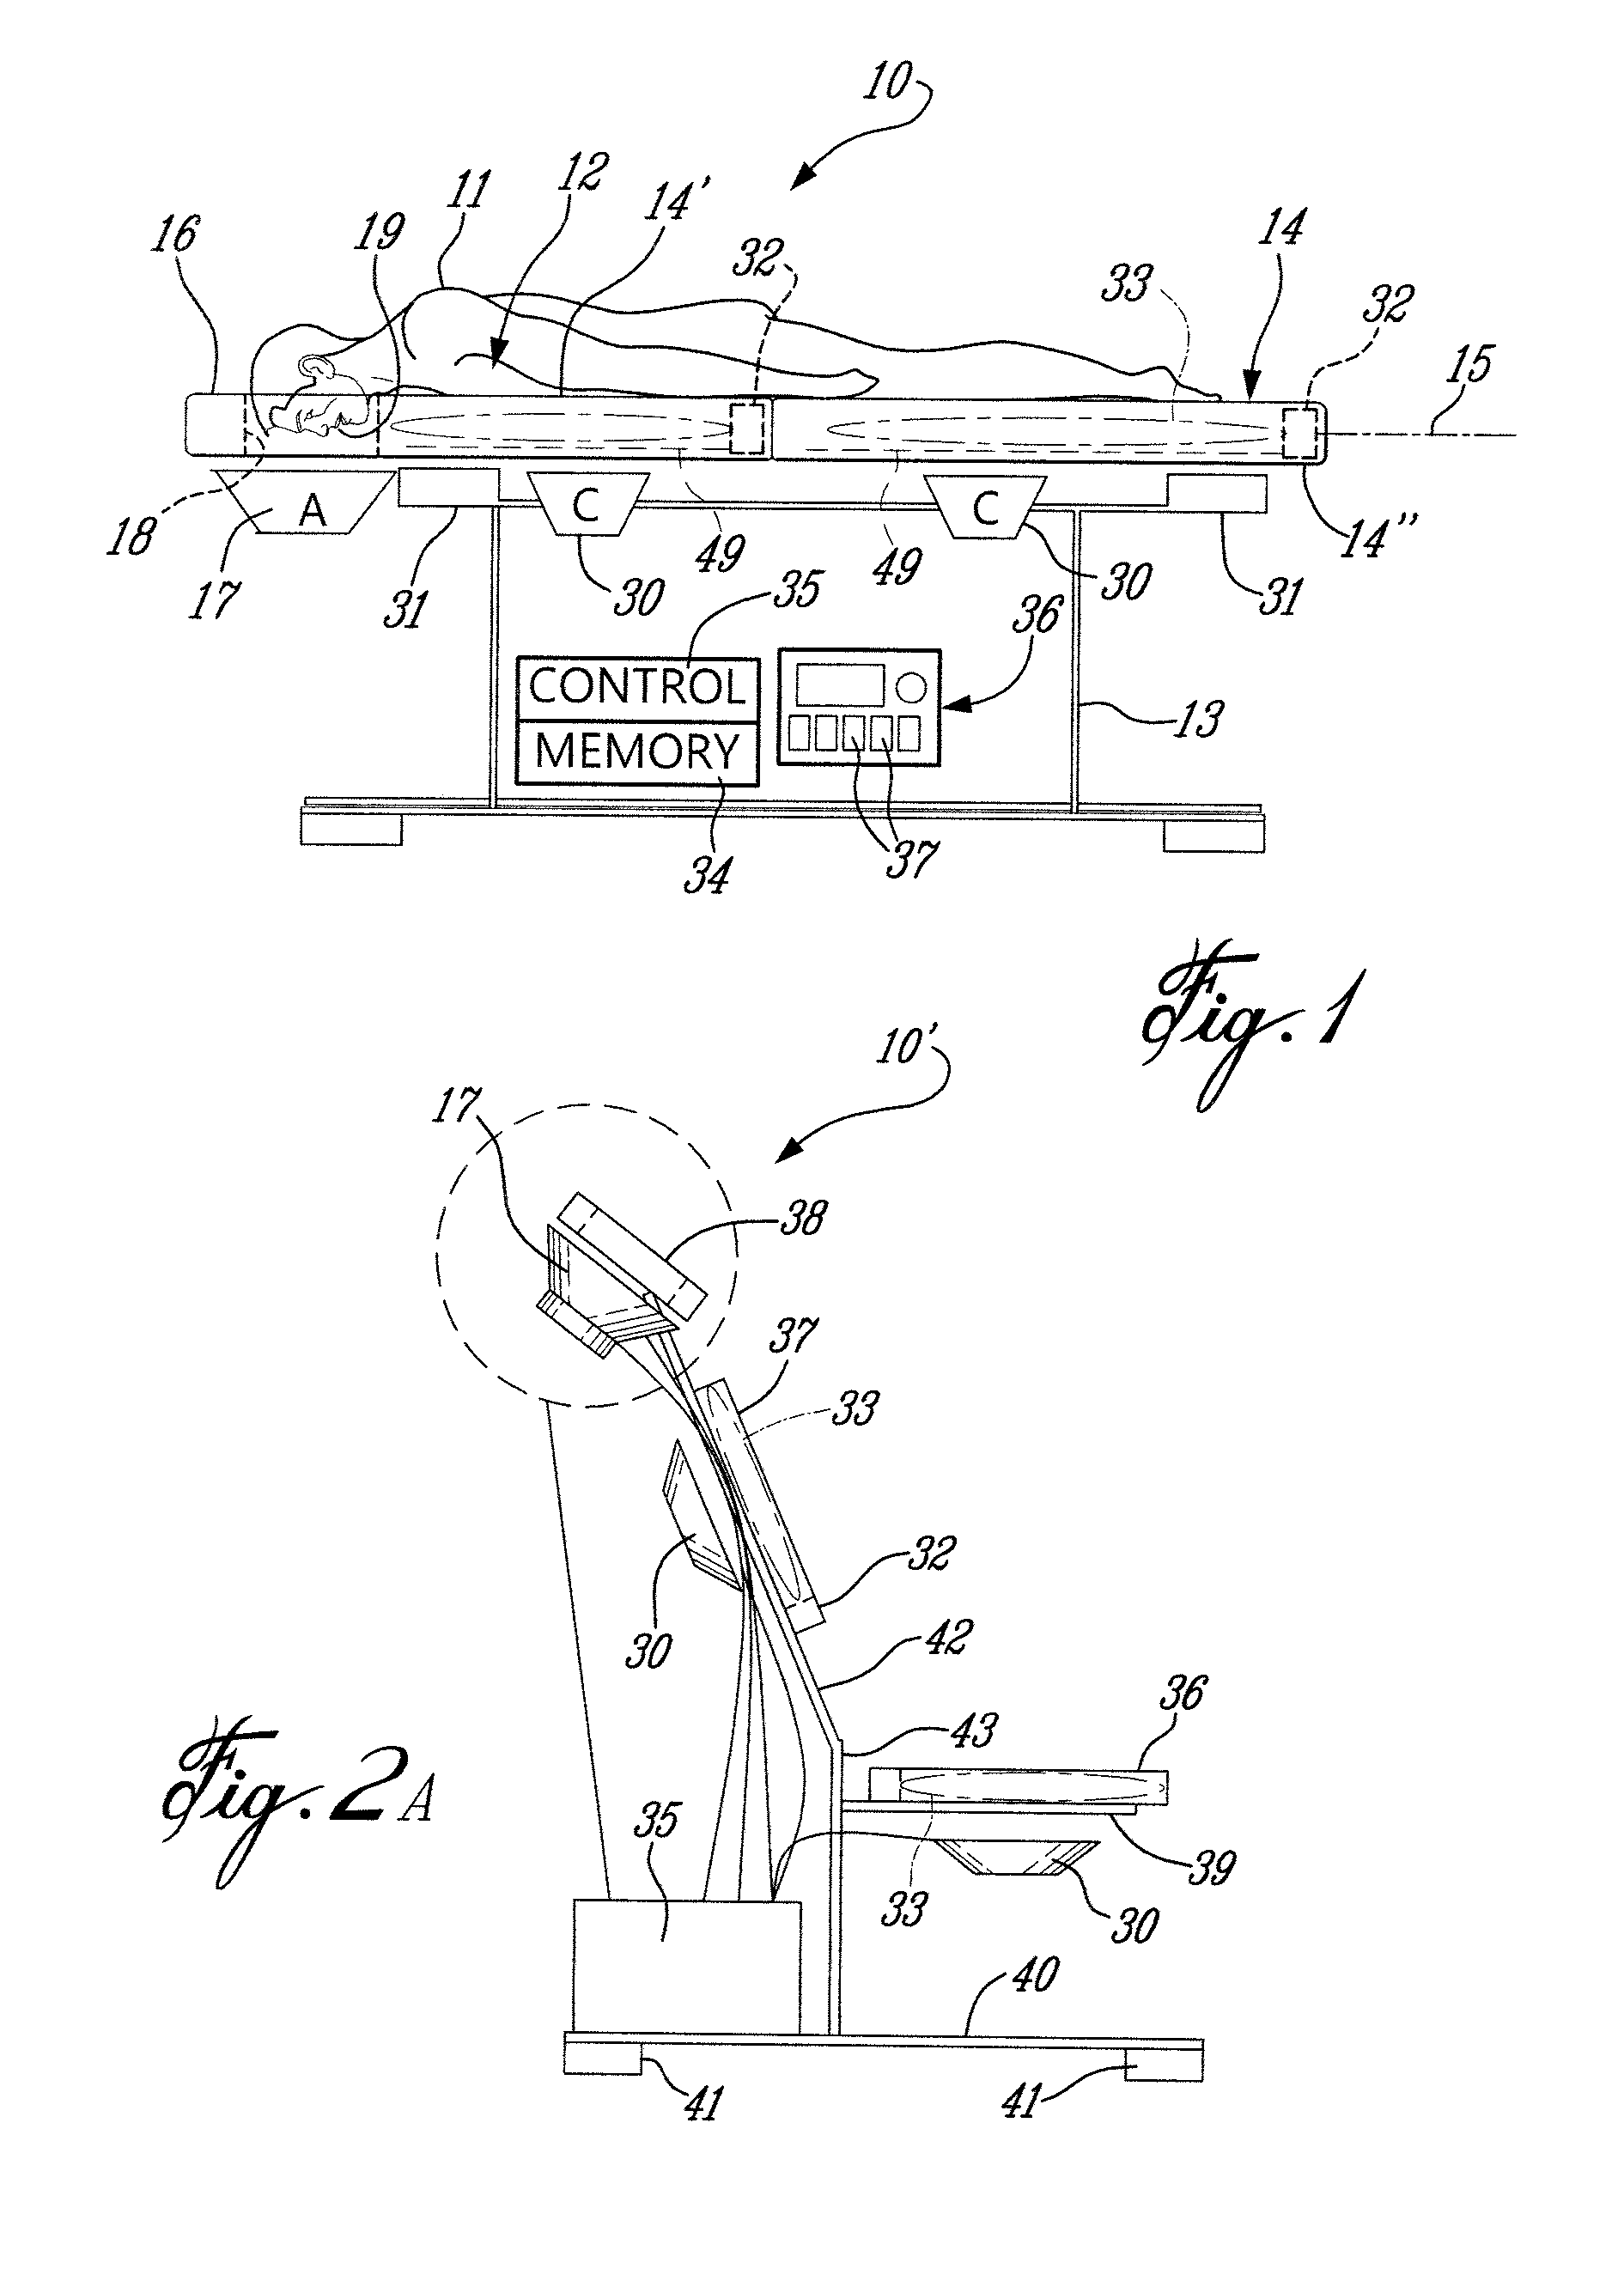 Therapy devices and domestic/commercial therapy system